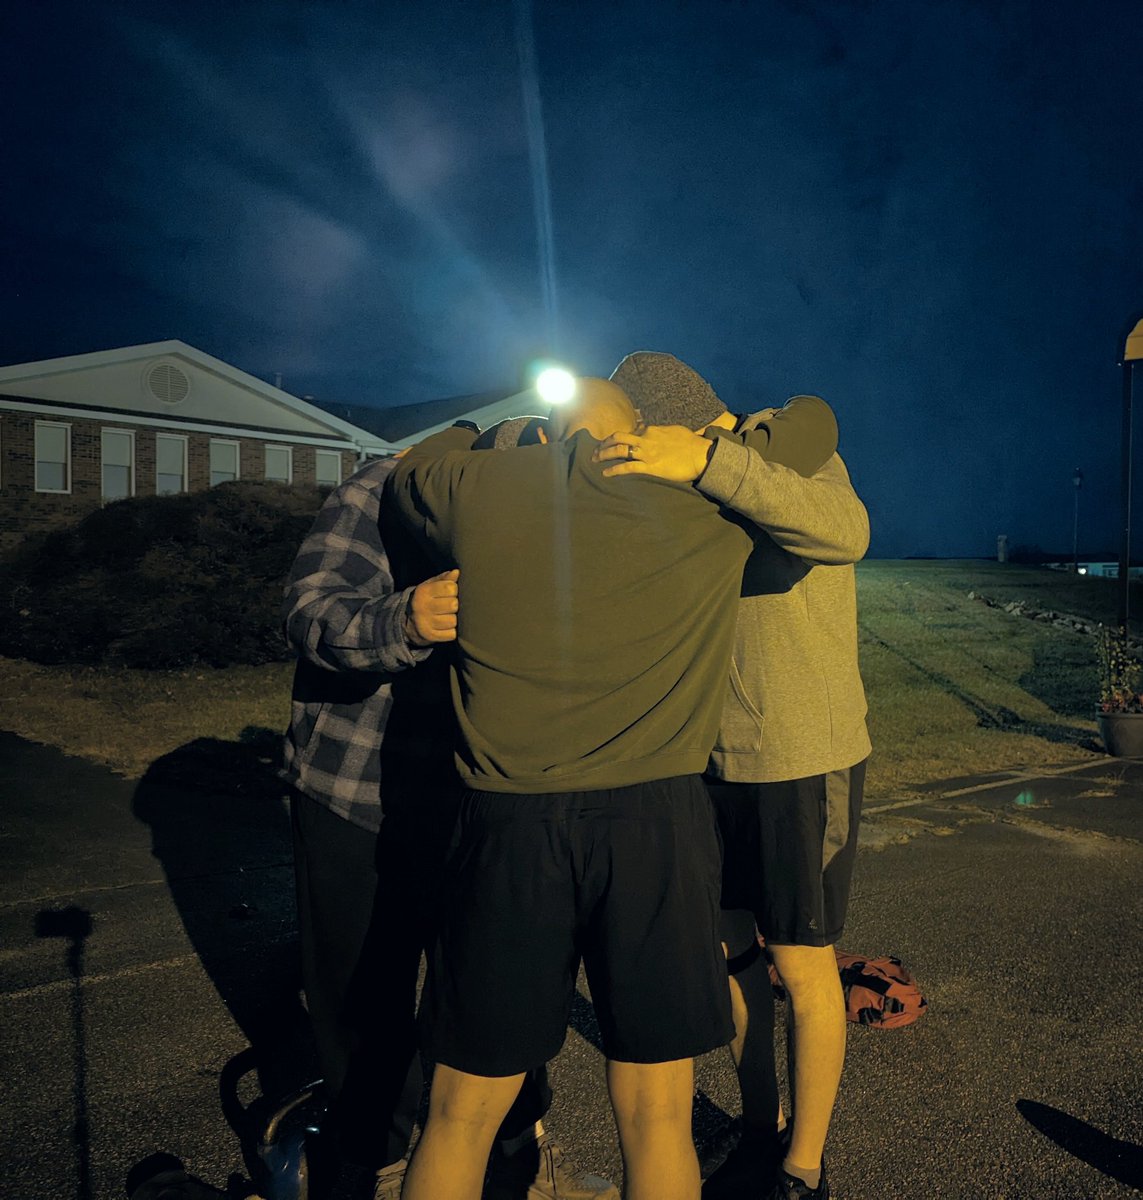 3x HIMs started the New Year off the right way with #AO_MonsterMile So, what are you waiting on? Free to all men. @F3Nation @MooresvilleNC Even the @F3GhostFlagNC made it out for the New Year.